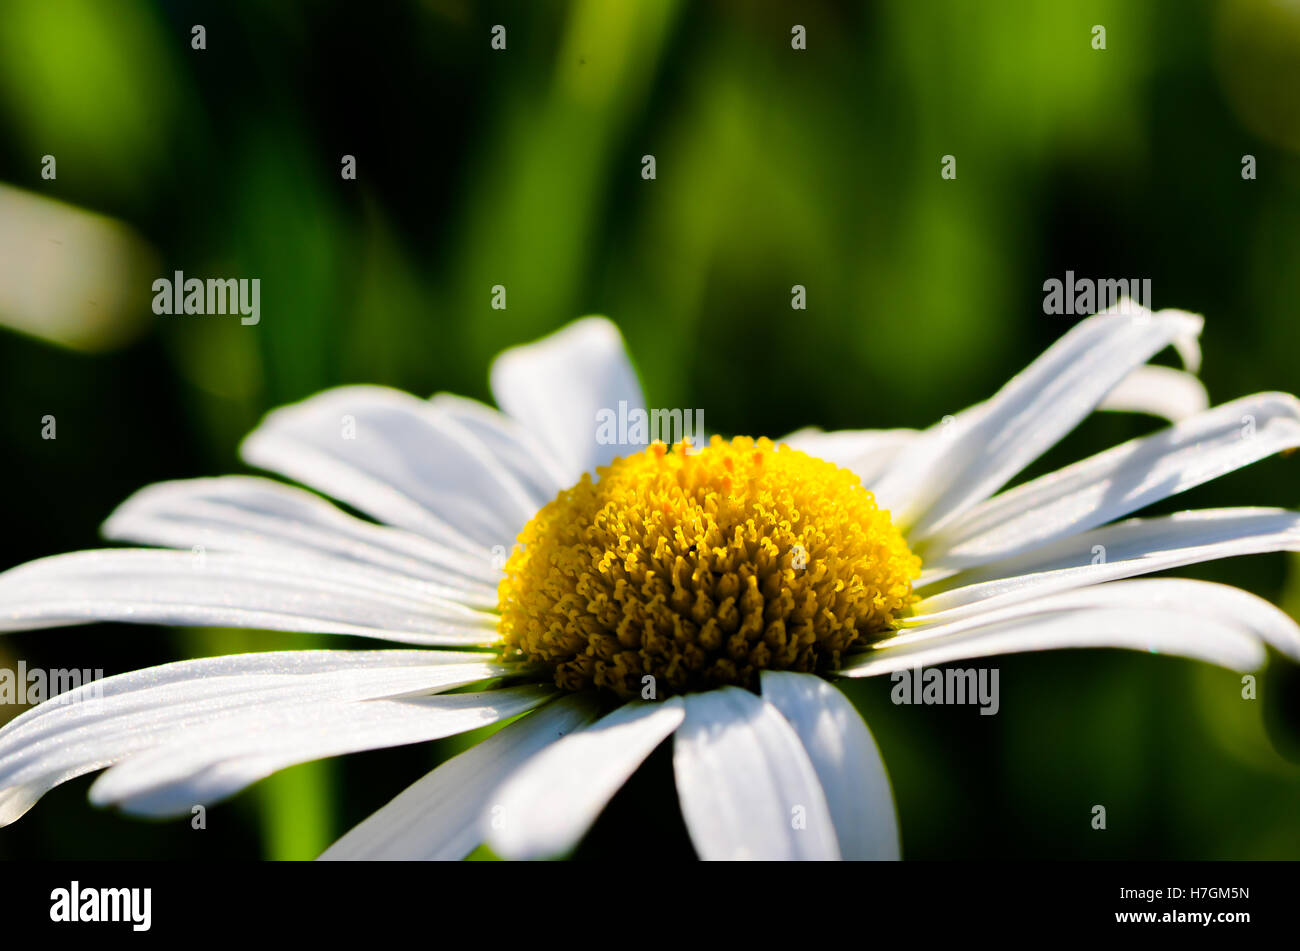 White and yellow flower close up side view Stock Photo